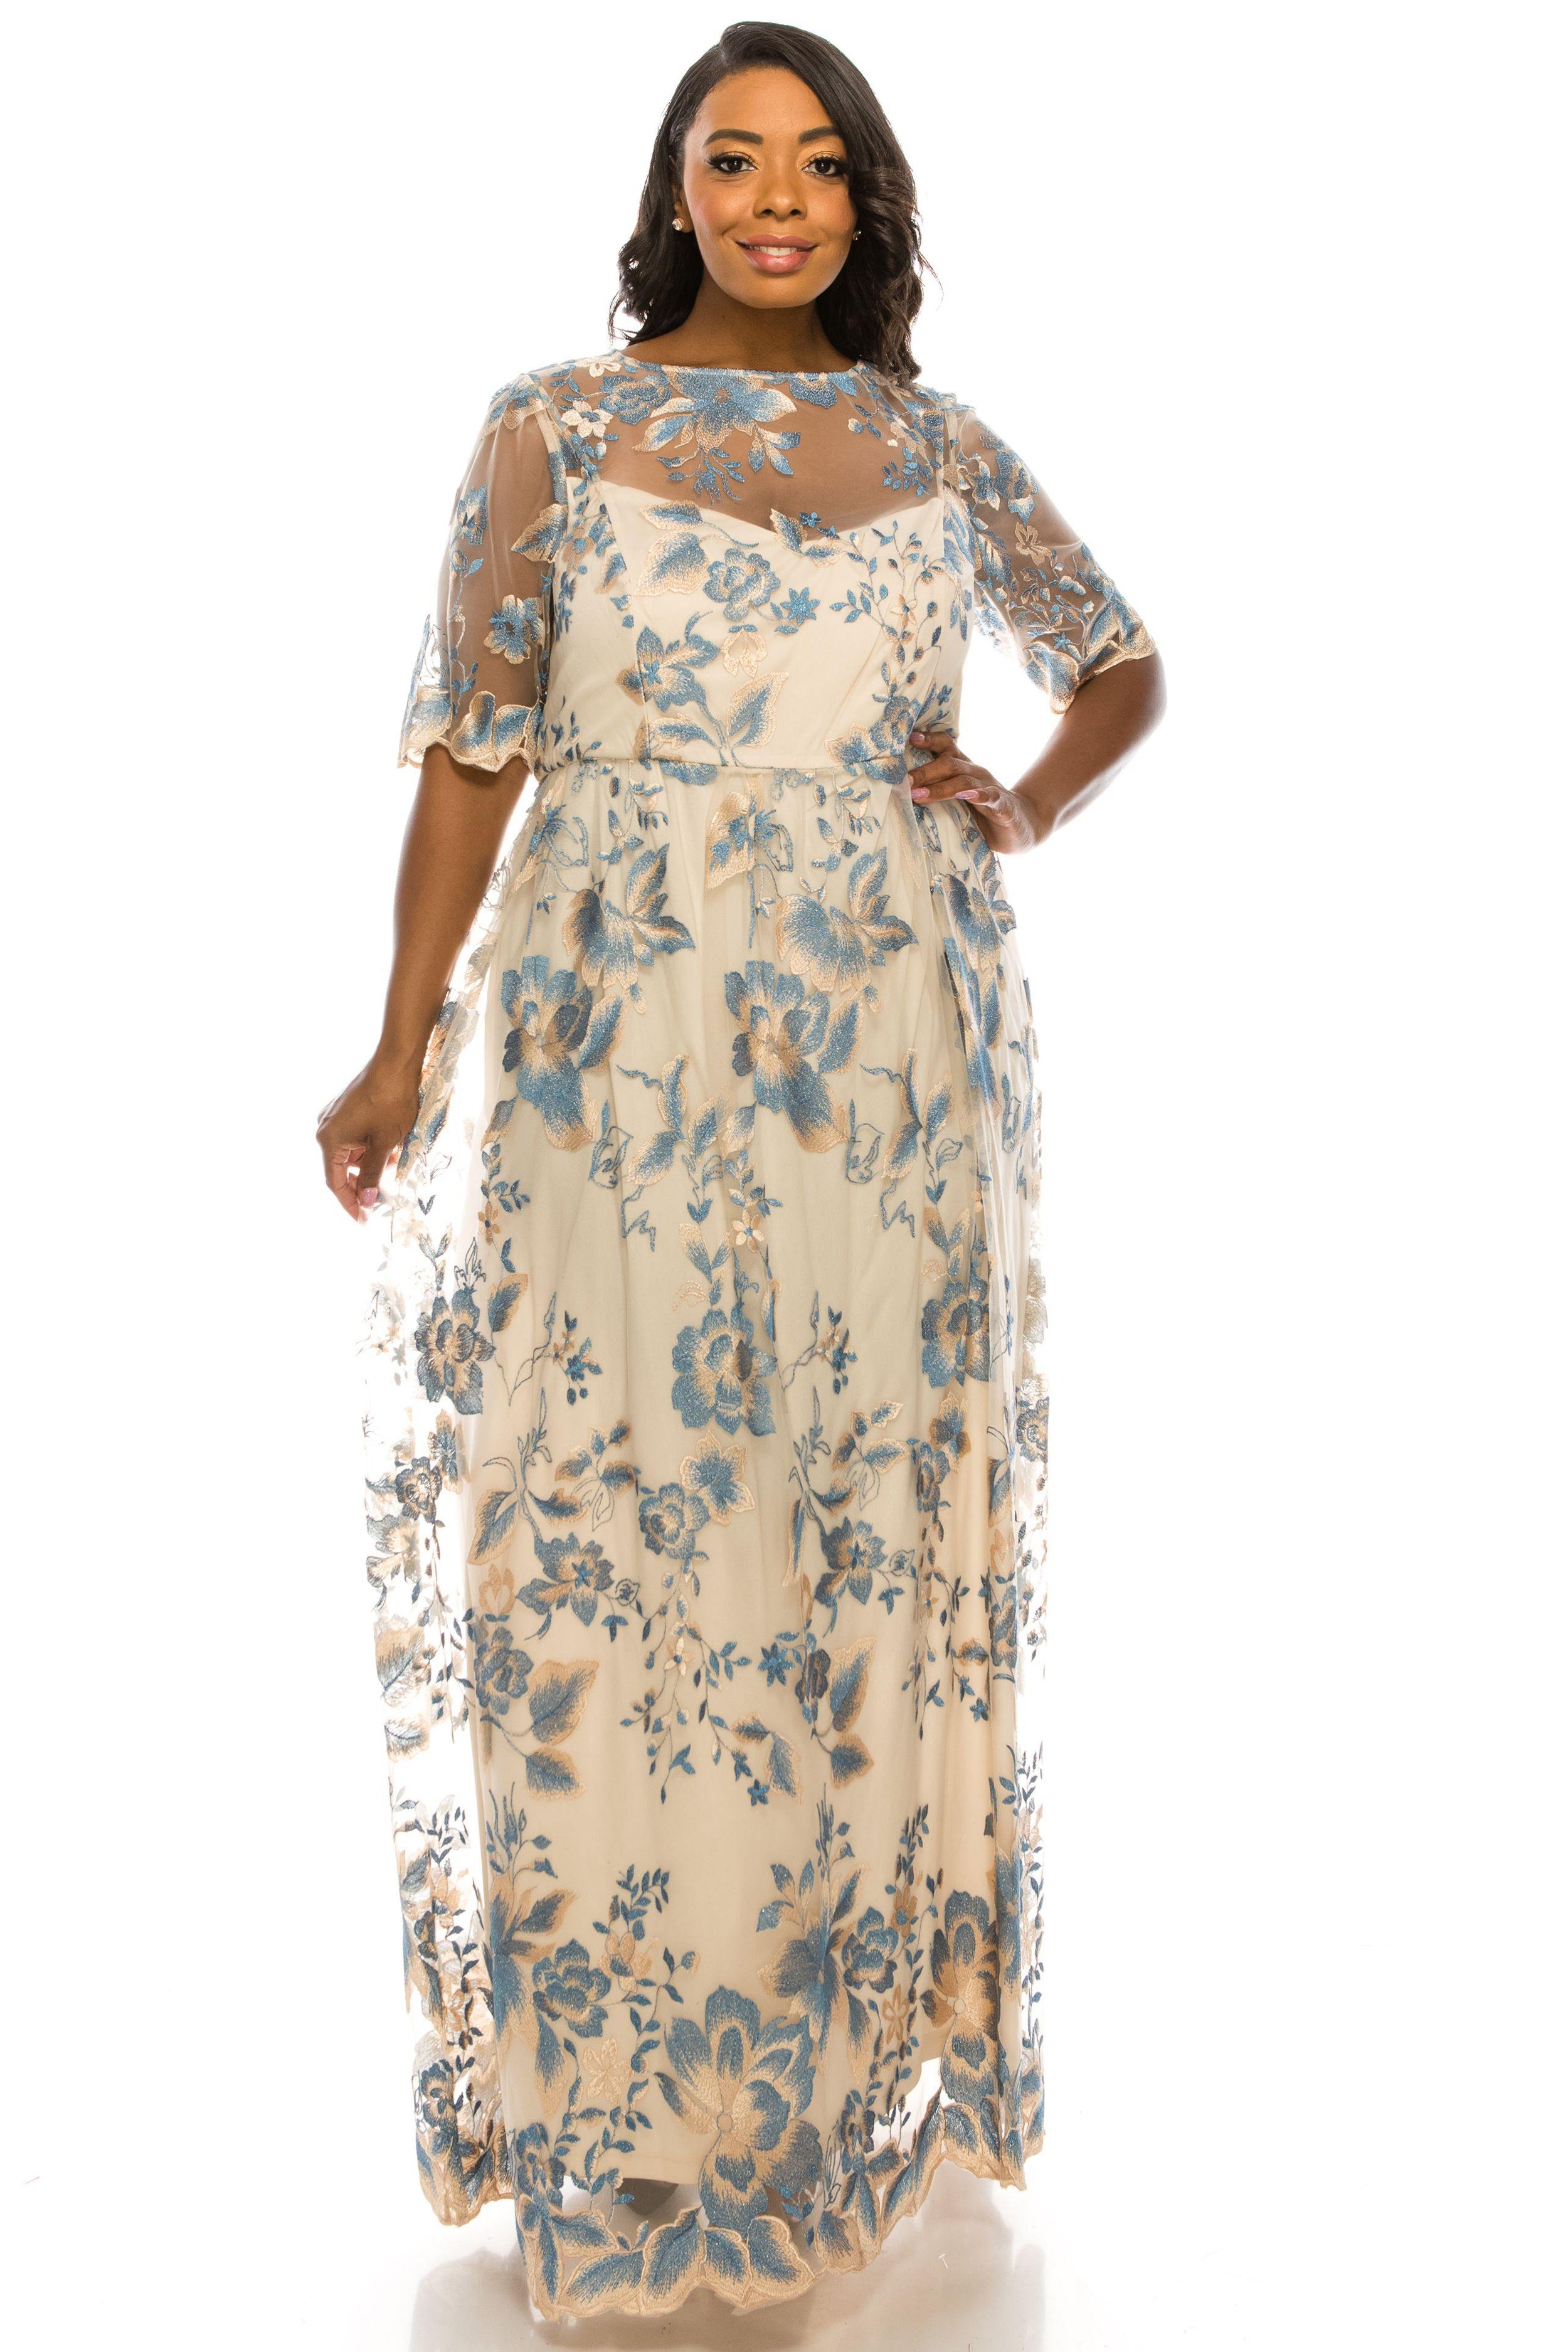 Adrianna Papell Long Floral Evening Gown AP1E200779W - The Dress Outlet